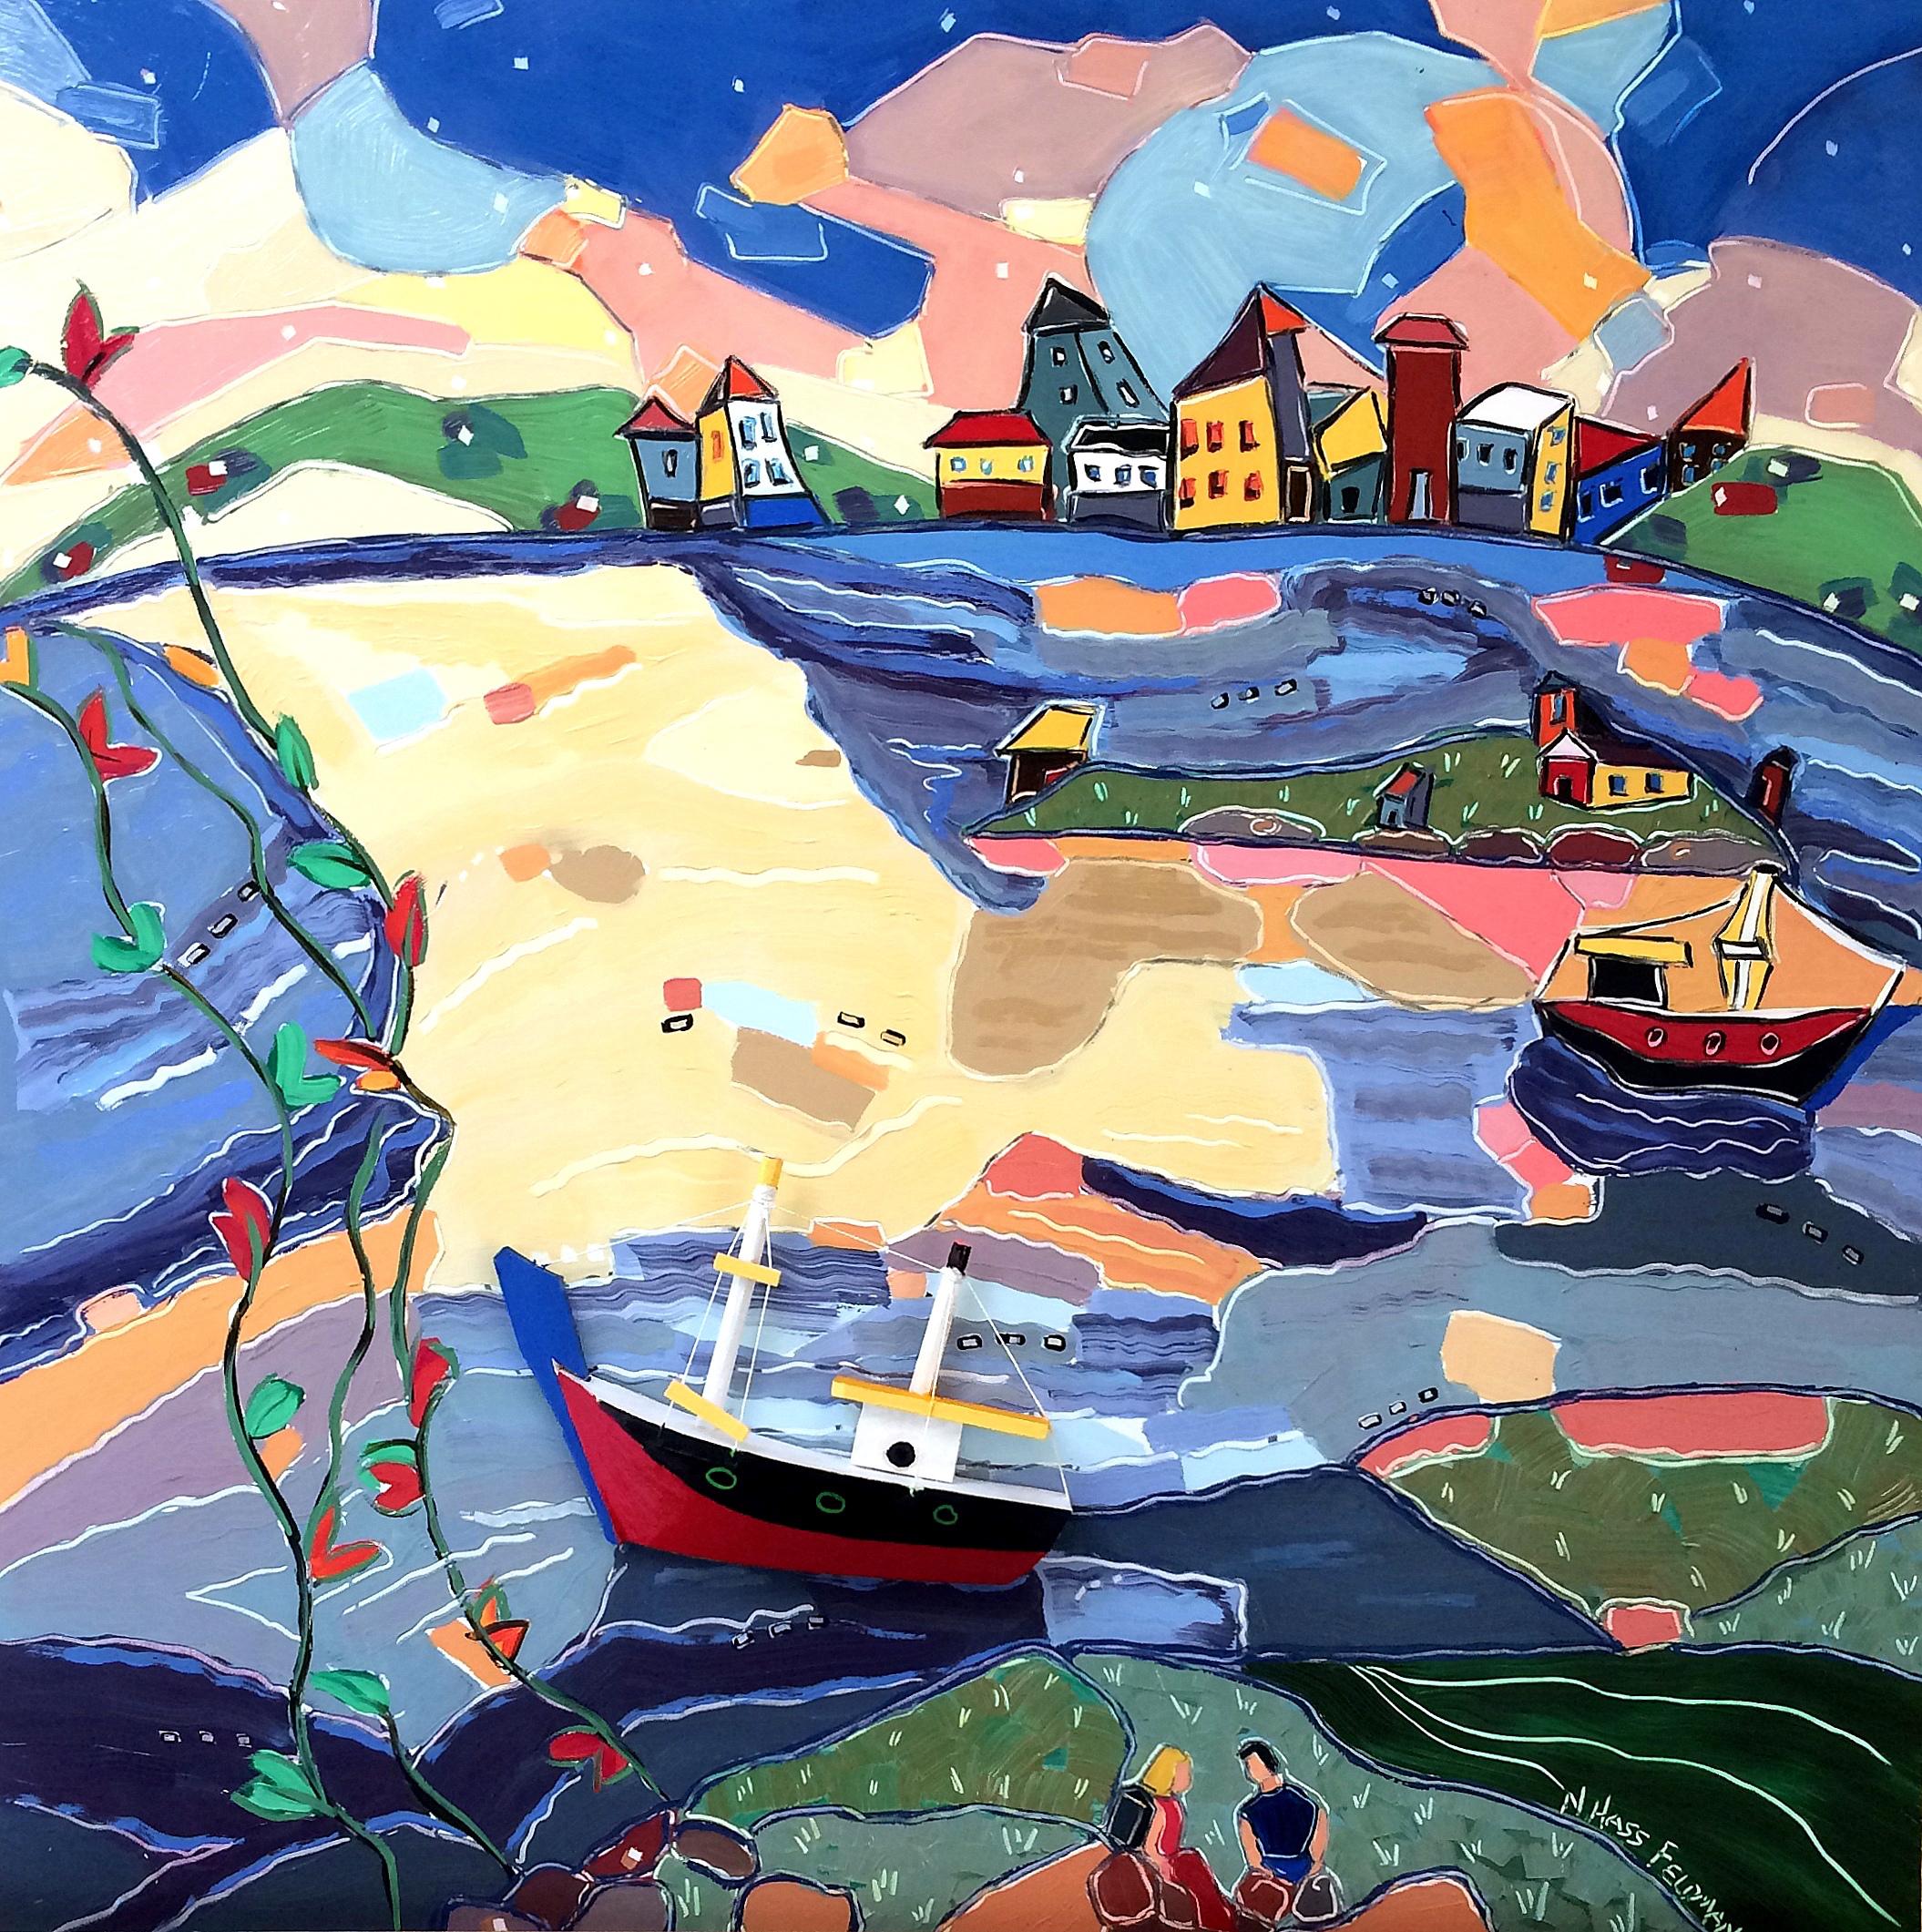 "Picnic in Valparaiso", landscape, city, Chile, boats, blue, red, oil painting - Painting by Nan Hass Feldman